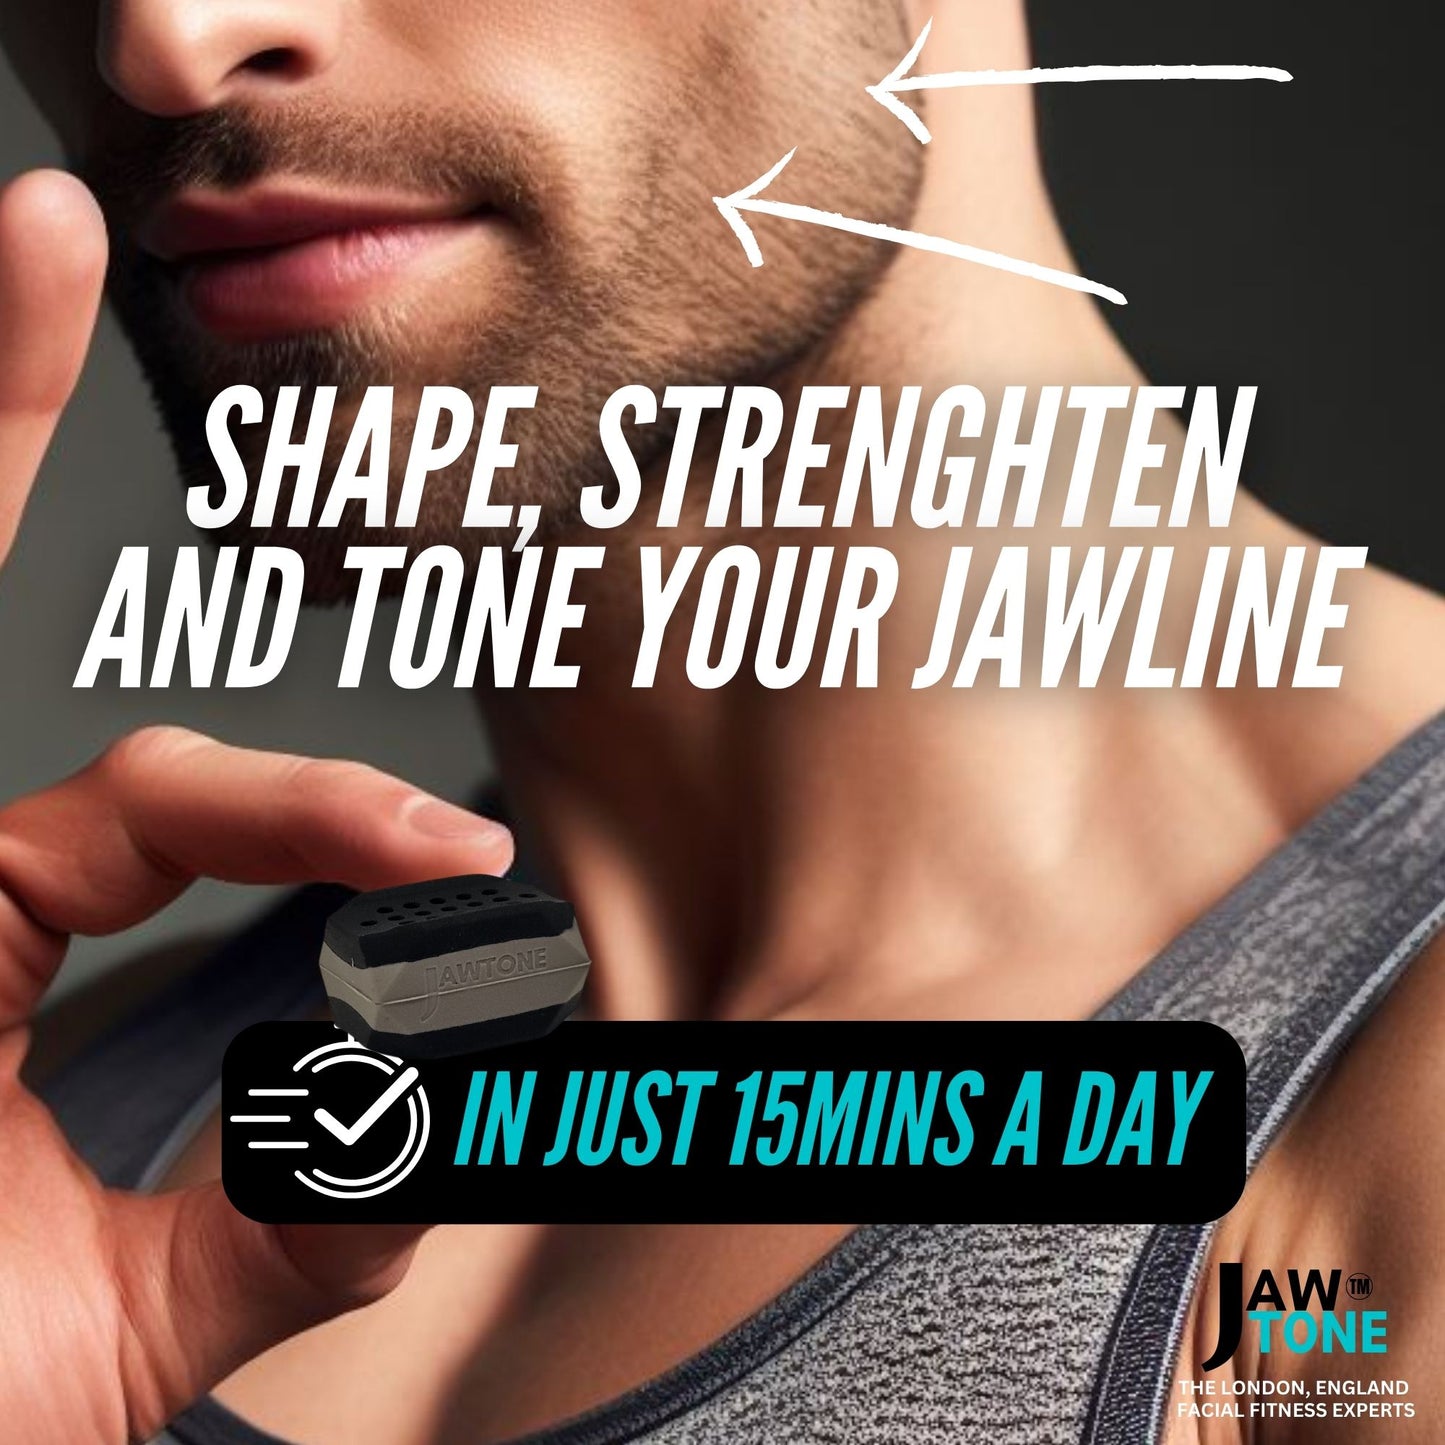 jawblocks jawline exerciser jaw exerciser men woman jaw shaper tone slim tighten neck chin face jawline face slimming jawliner jawrz double chin removal face yoga face workout gym 